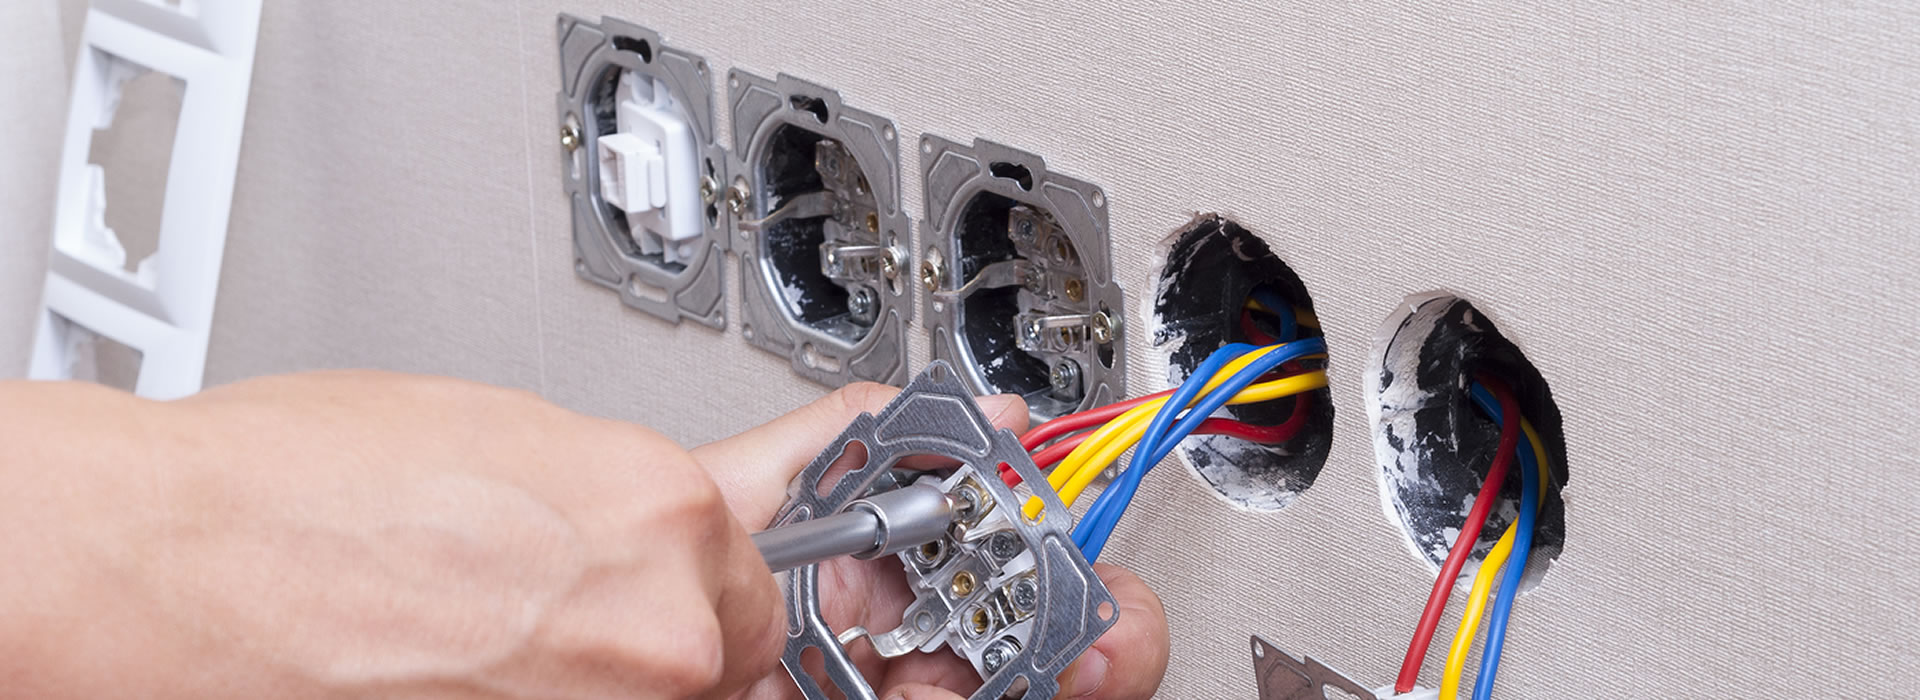 Electrical Outlet Replacement in West Babylon, NY